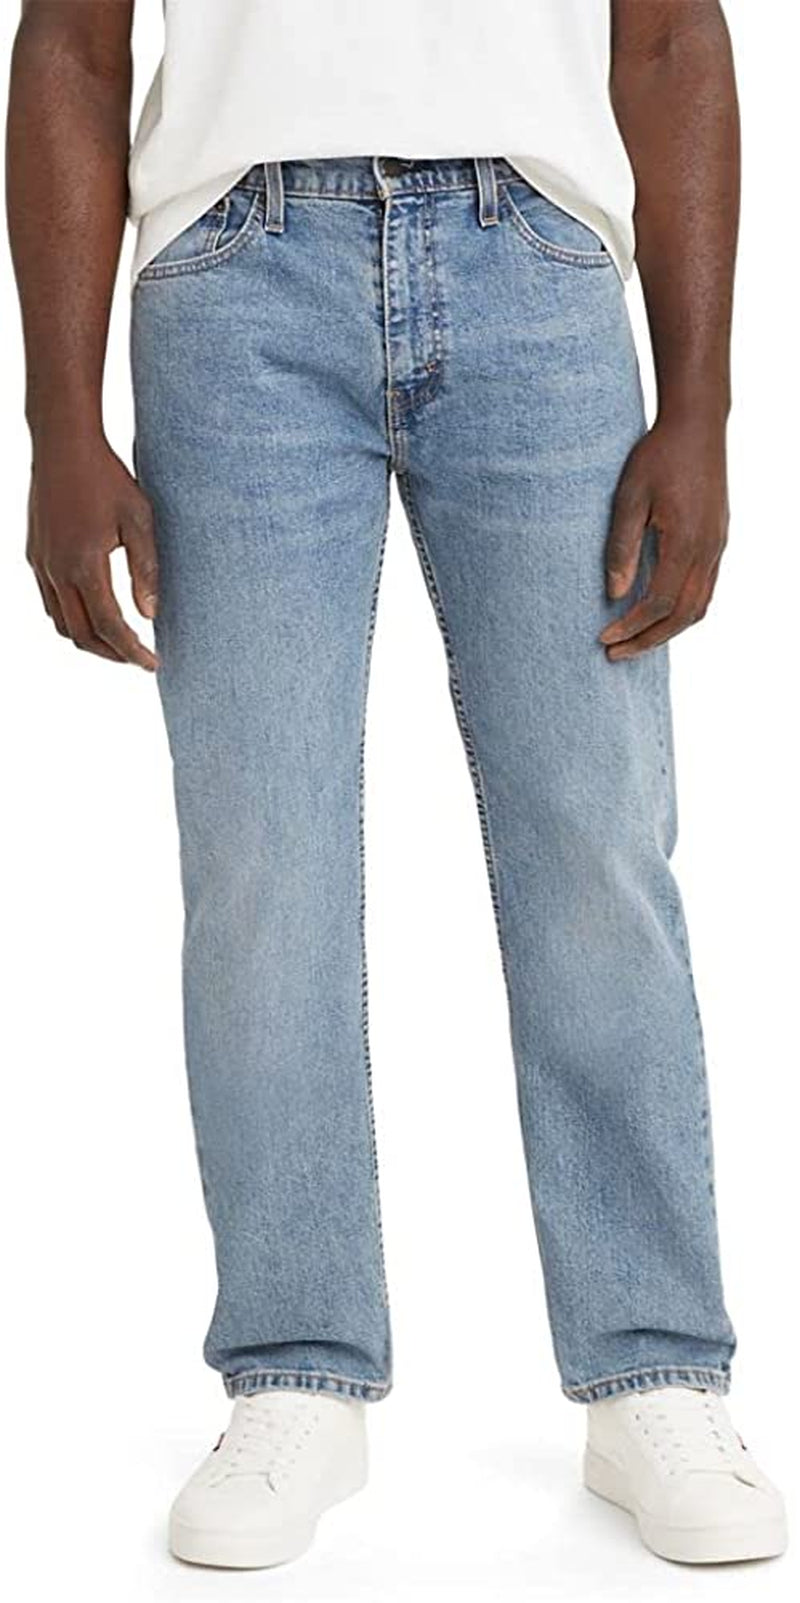 Cotton Levi's jeans in sky blue. Five-pocket styling. Zip-fly. Belt loops at waistband. 